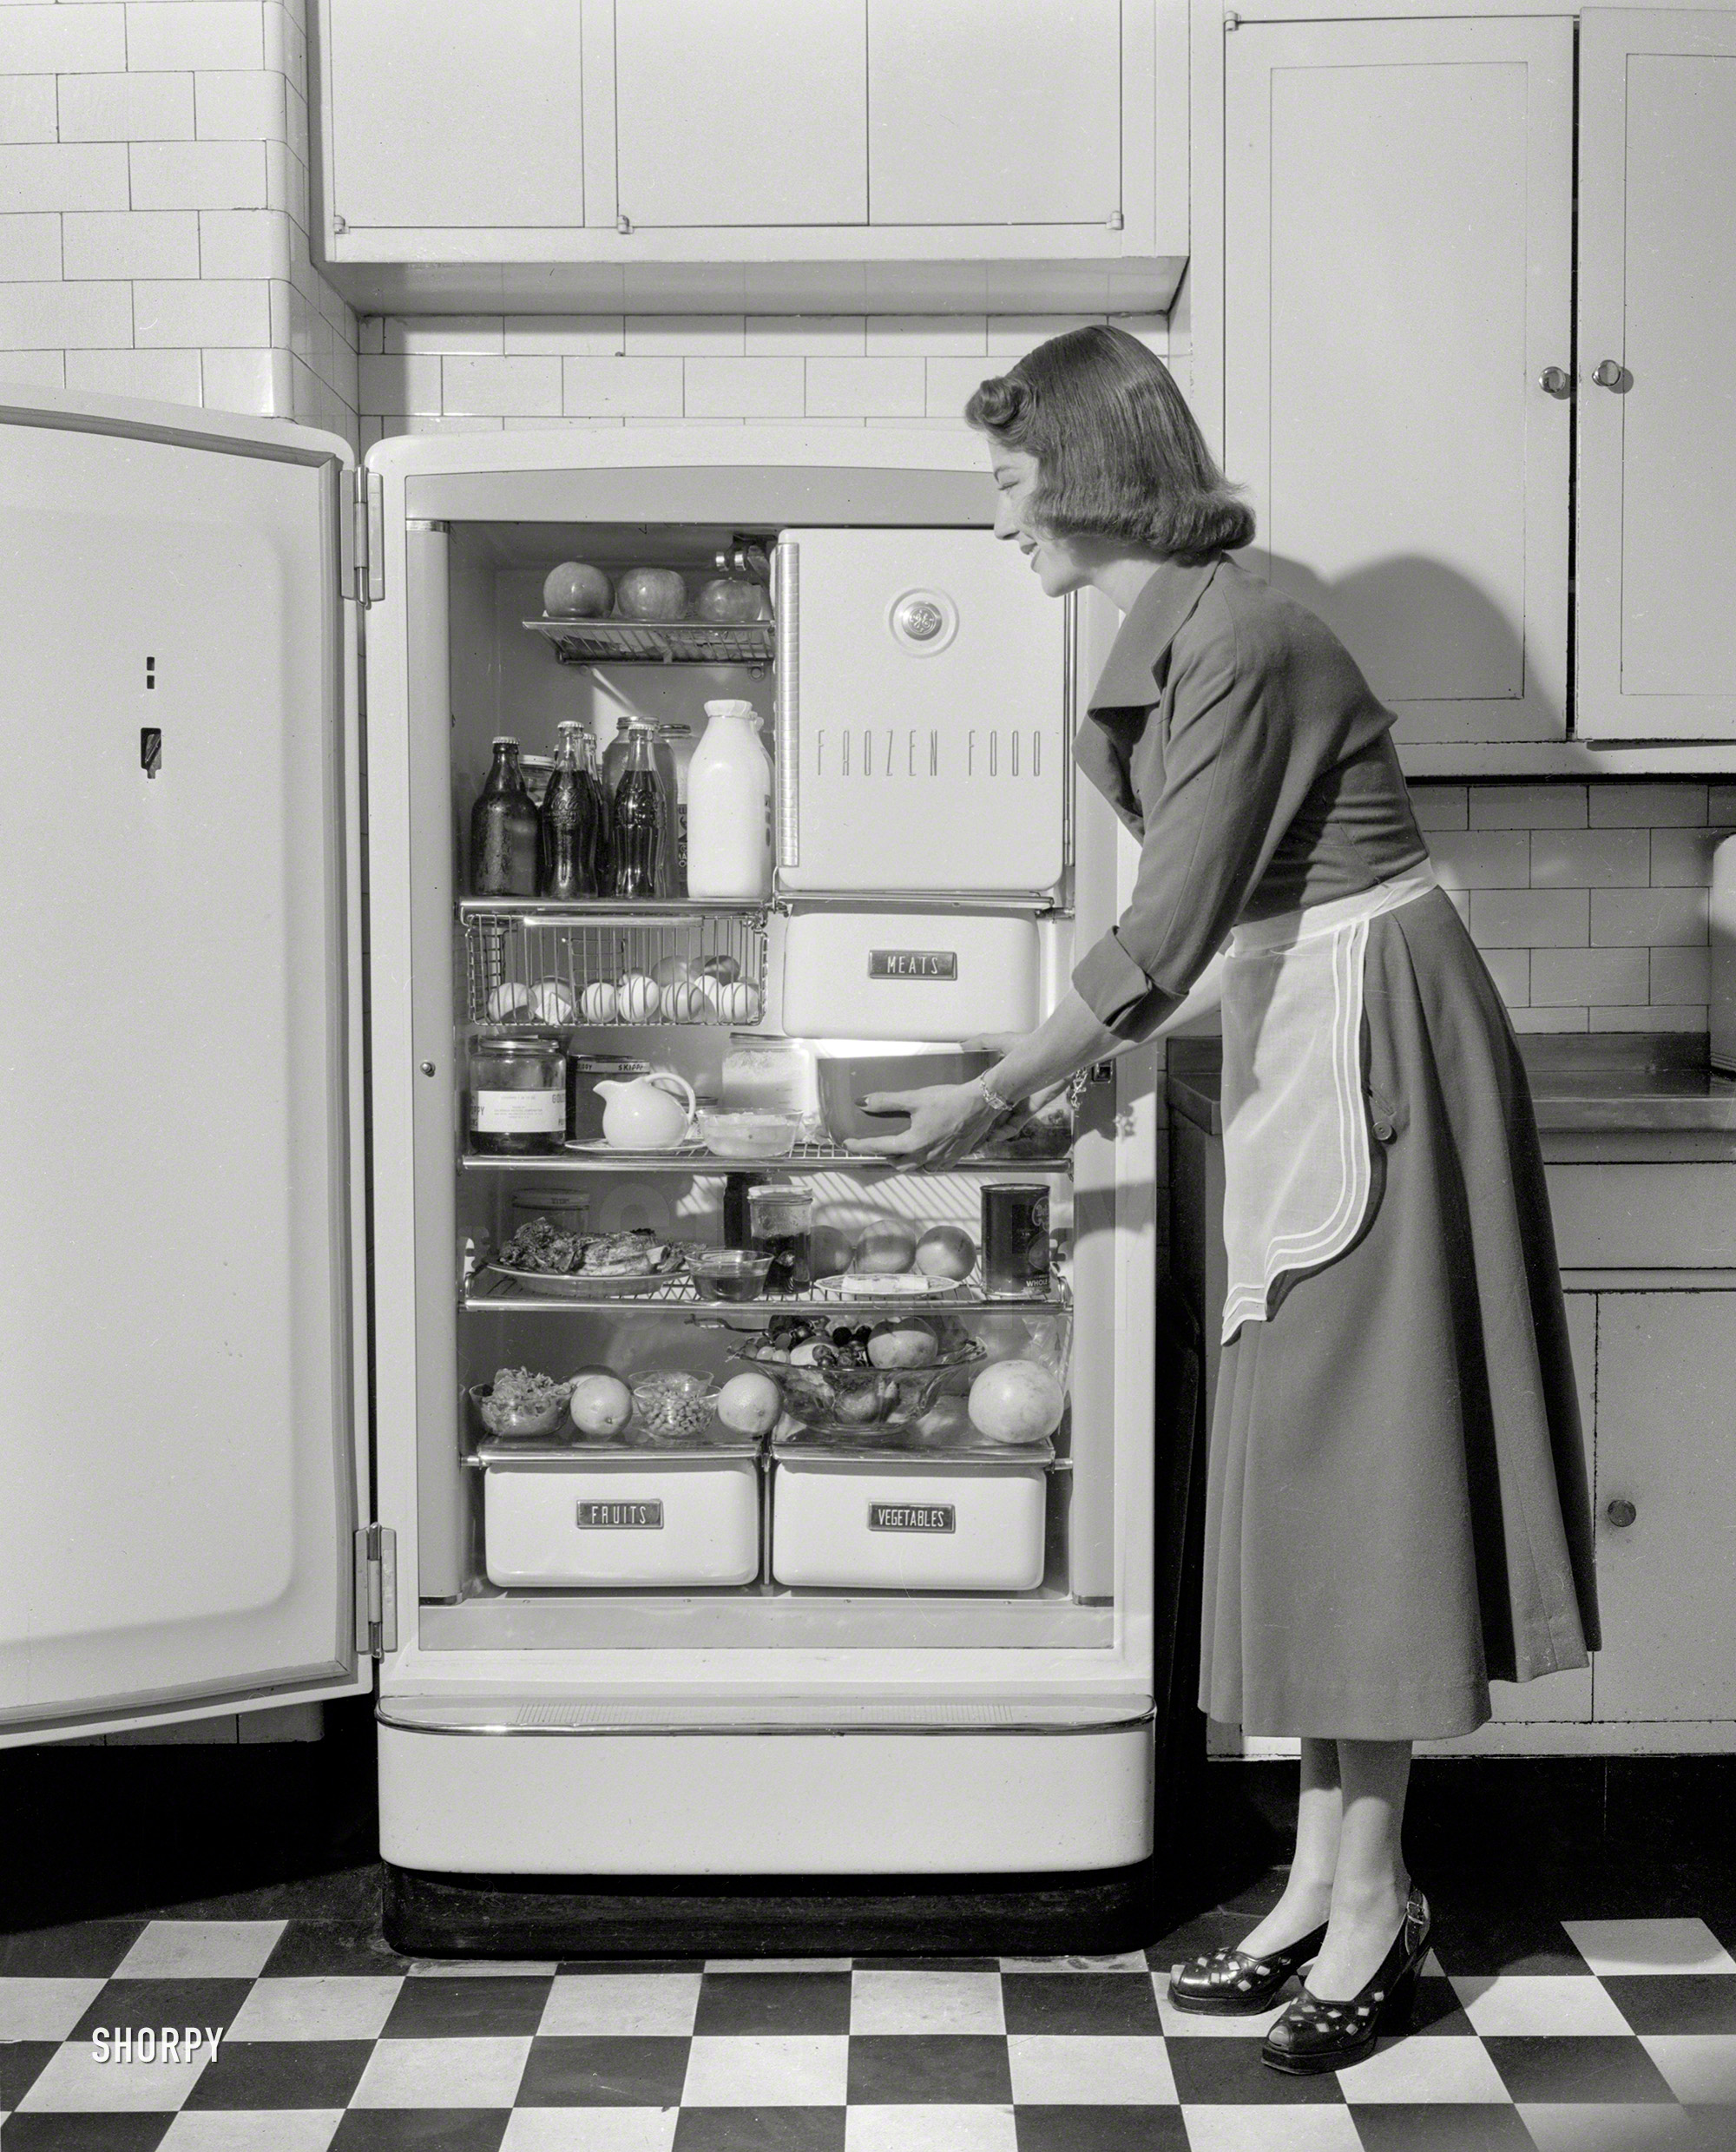 New York circa 1948. "Woman in kitchen with General Electric refrigerator." Yes, this dish should warm up nicely. 4x5 negative by John M. Fox. View full size.